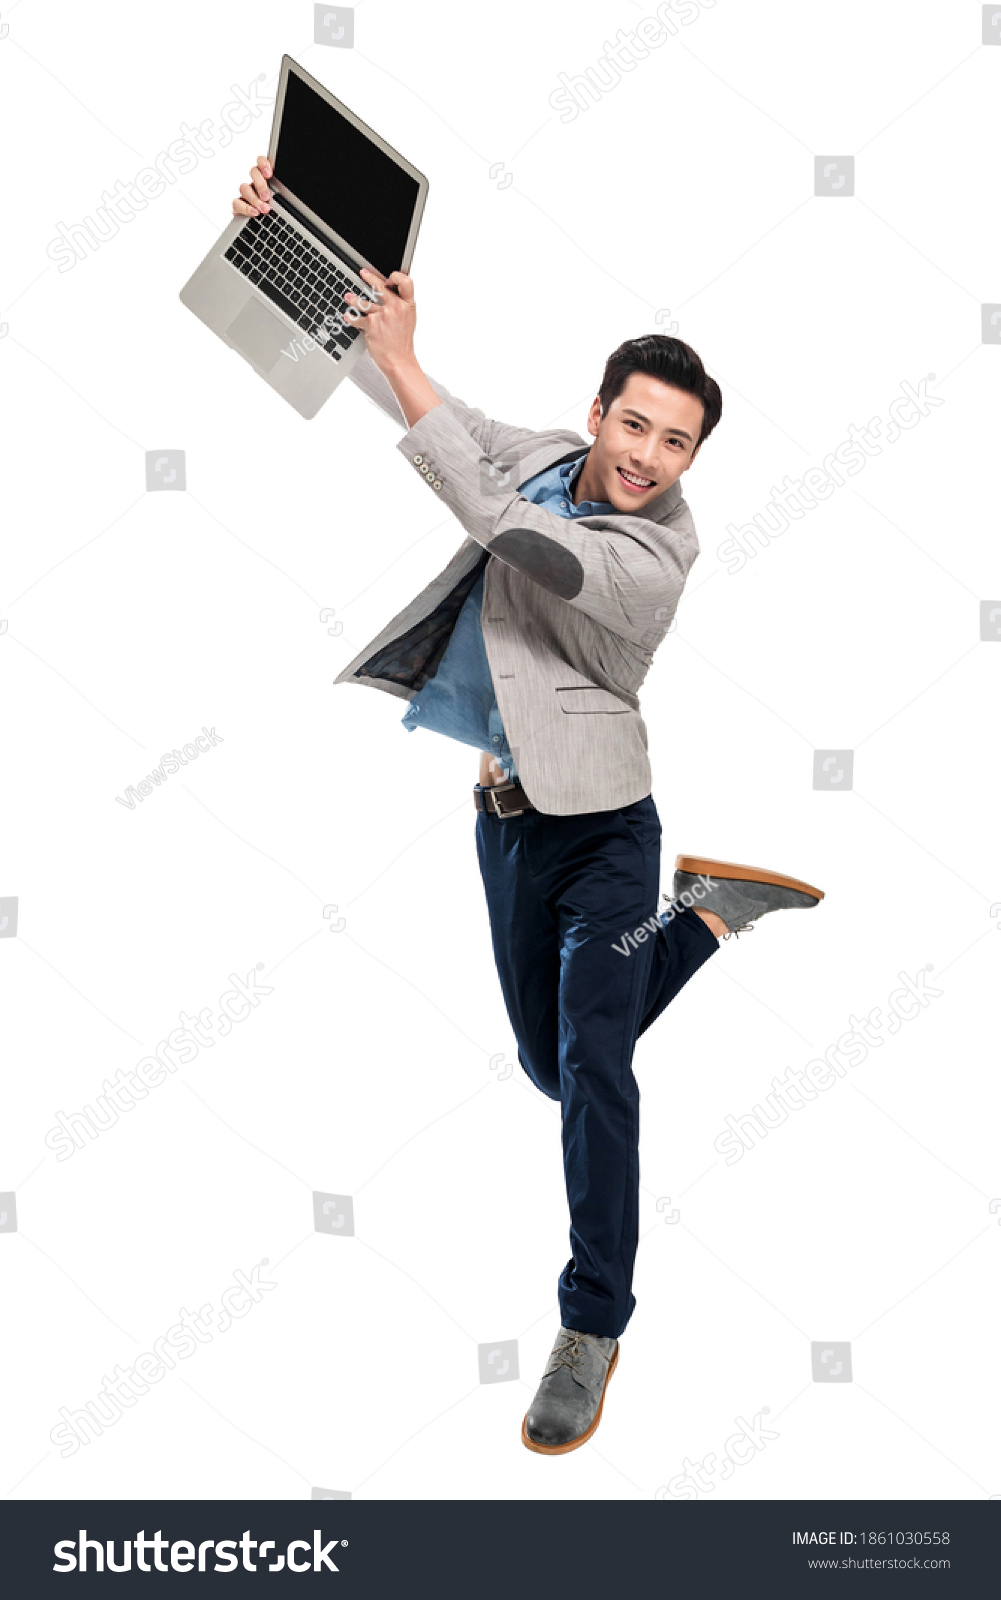 Carrying Laptop Bouncing Youth Business Man Stock Photo 1861030558 ...